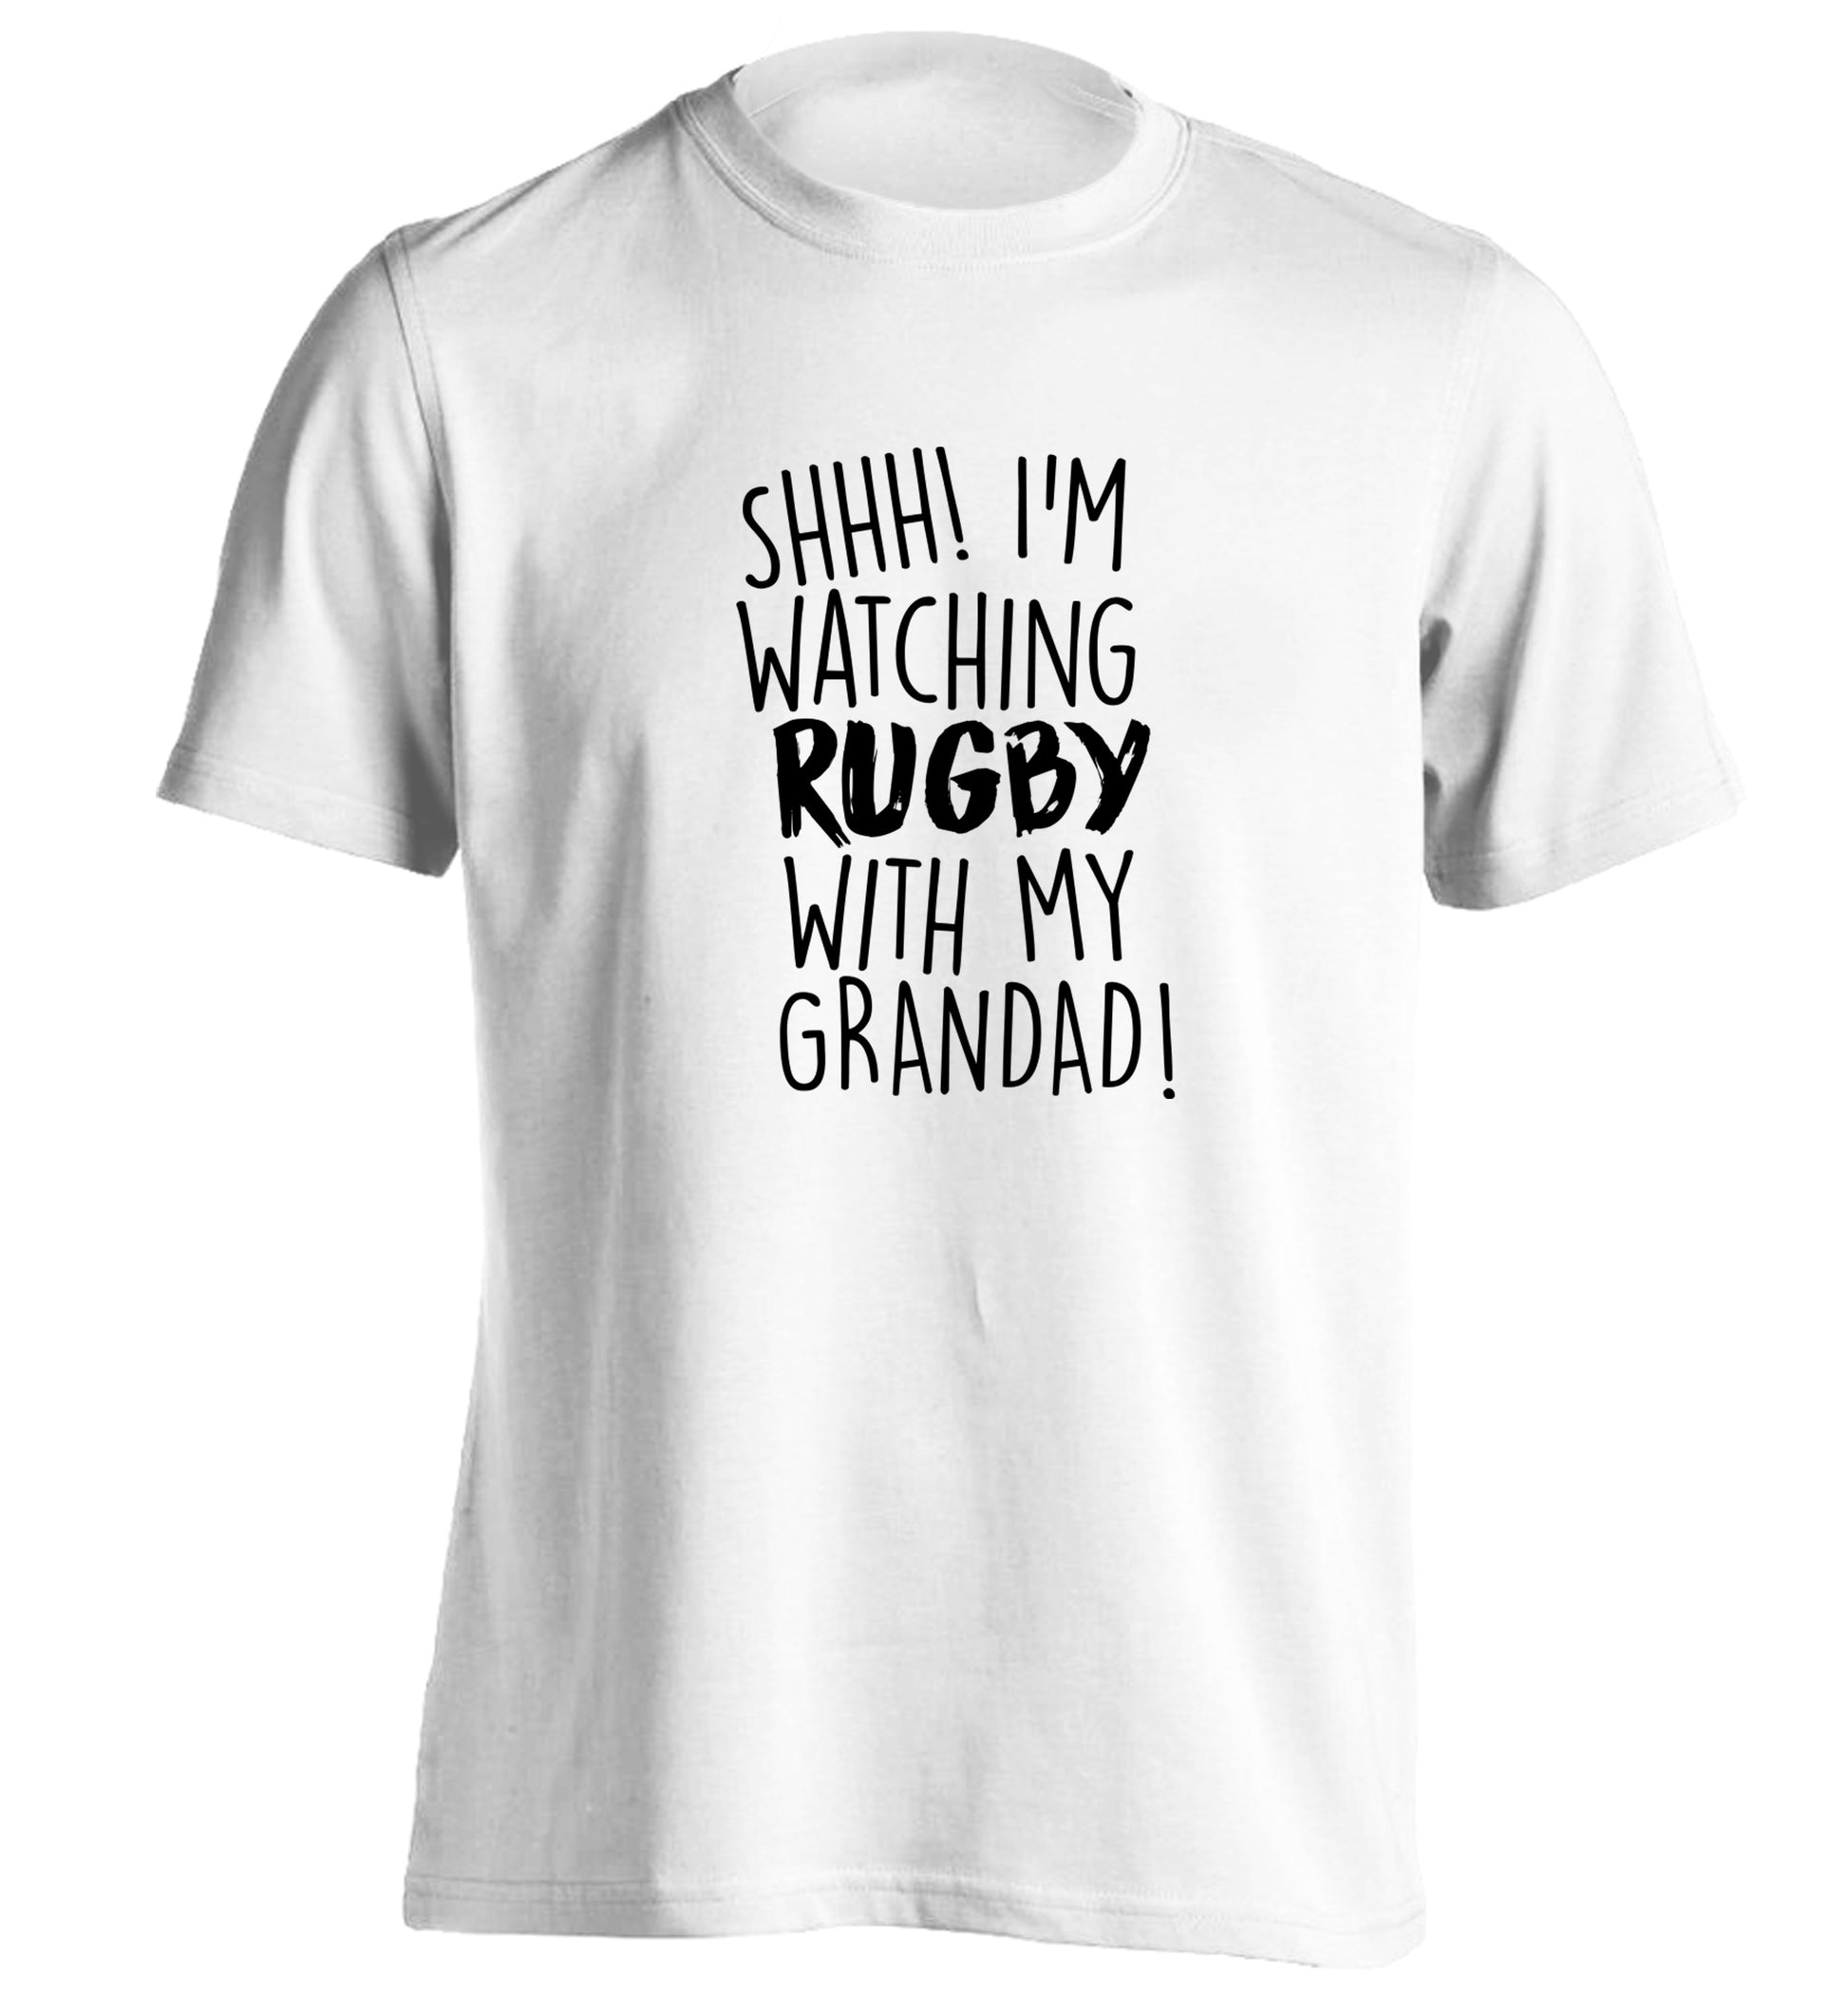 Shh I'm watching rugby with my grandaughter adults unisex white Tshirt 2XL